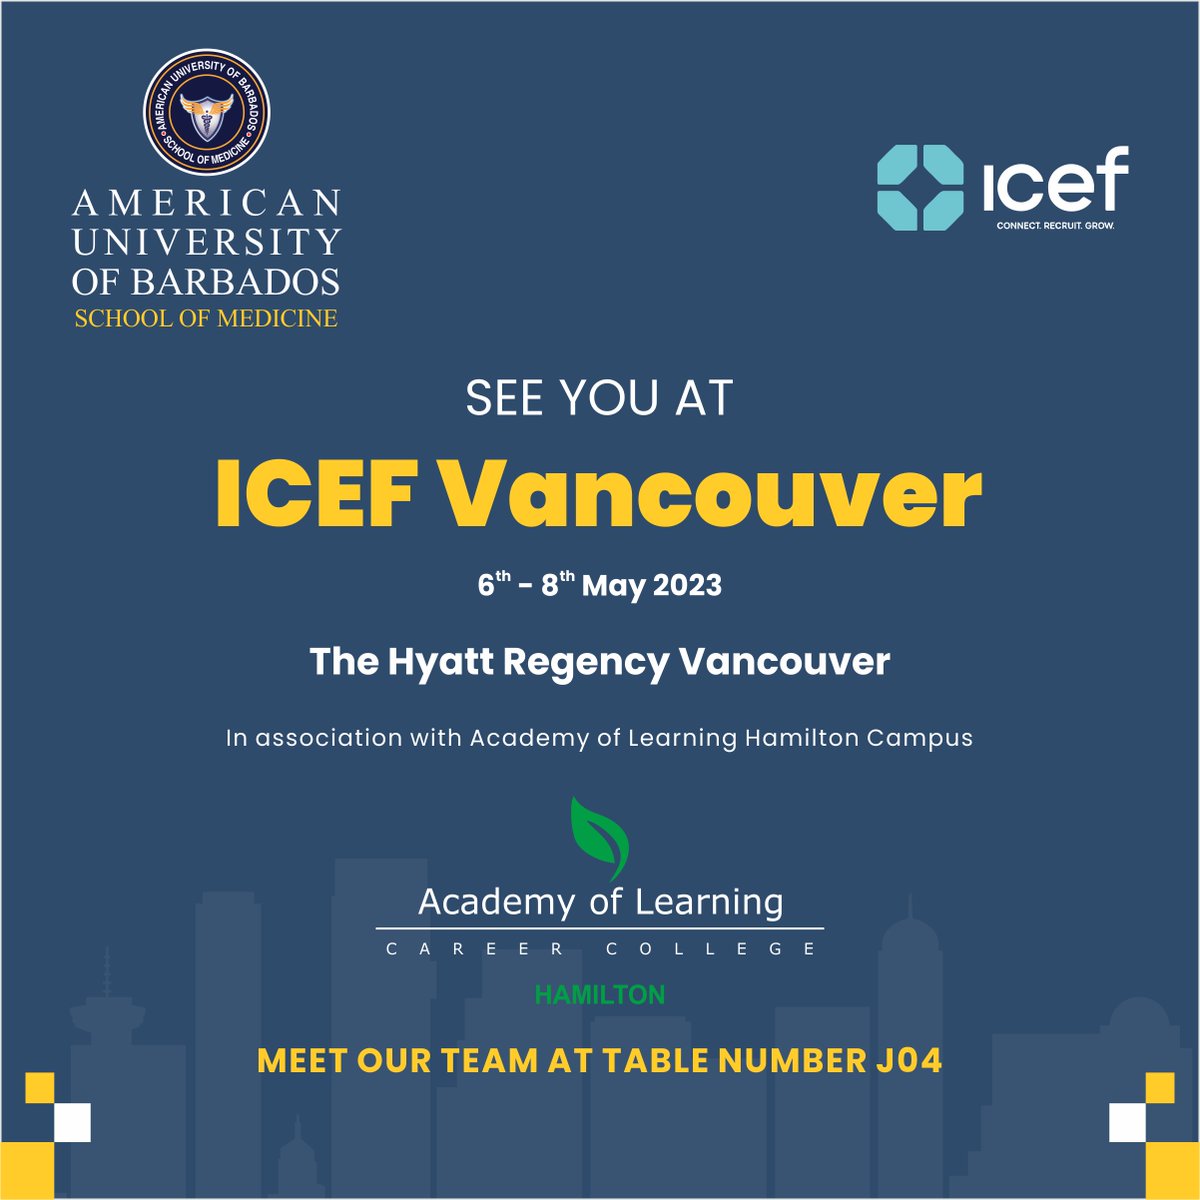 #AUB is participating in the #ICEFVancouver from May 06 to 08, 2023 at the Hyatt Regency Vancouver. Looking forward for positive and strategic relations in the #Canada and #USA.
For More Information:
🌐 aubmed.org
✉ info@aubmed.org
 #AmericanUniversityofBarbados